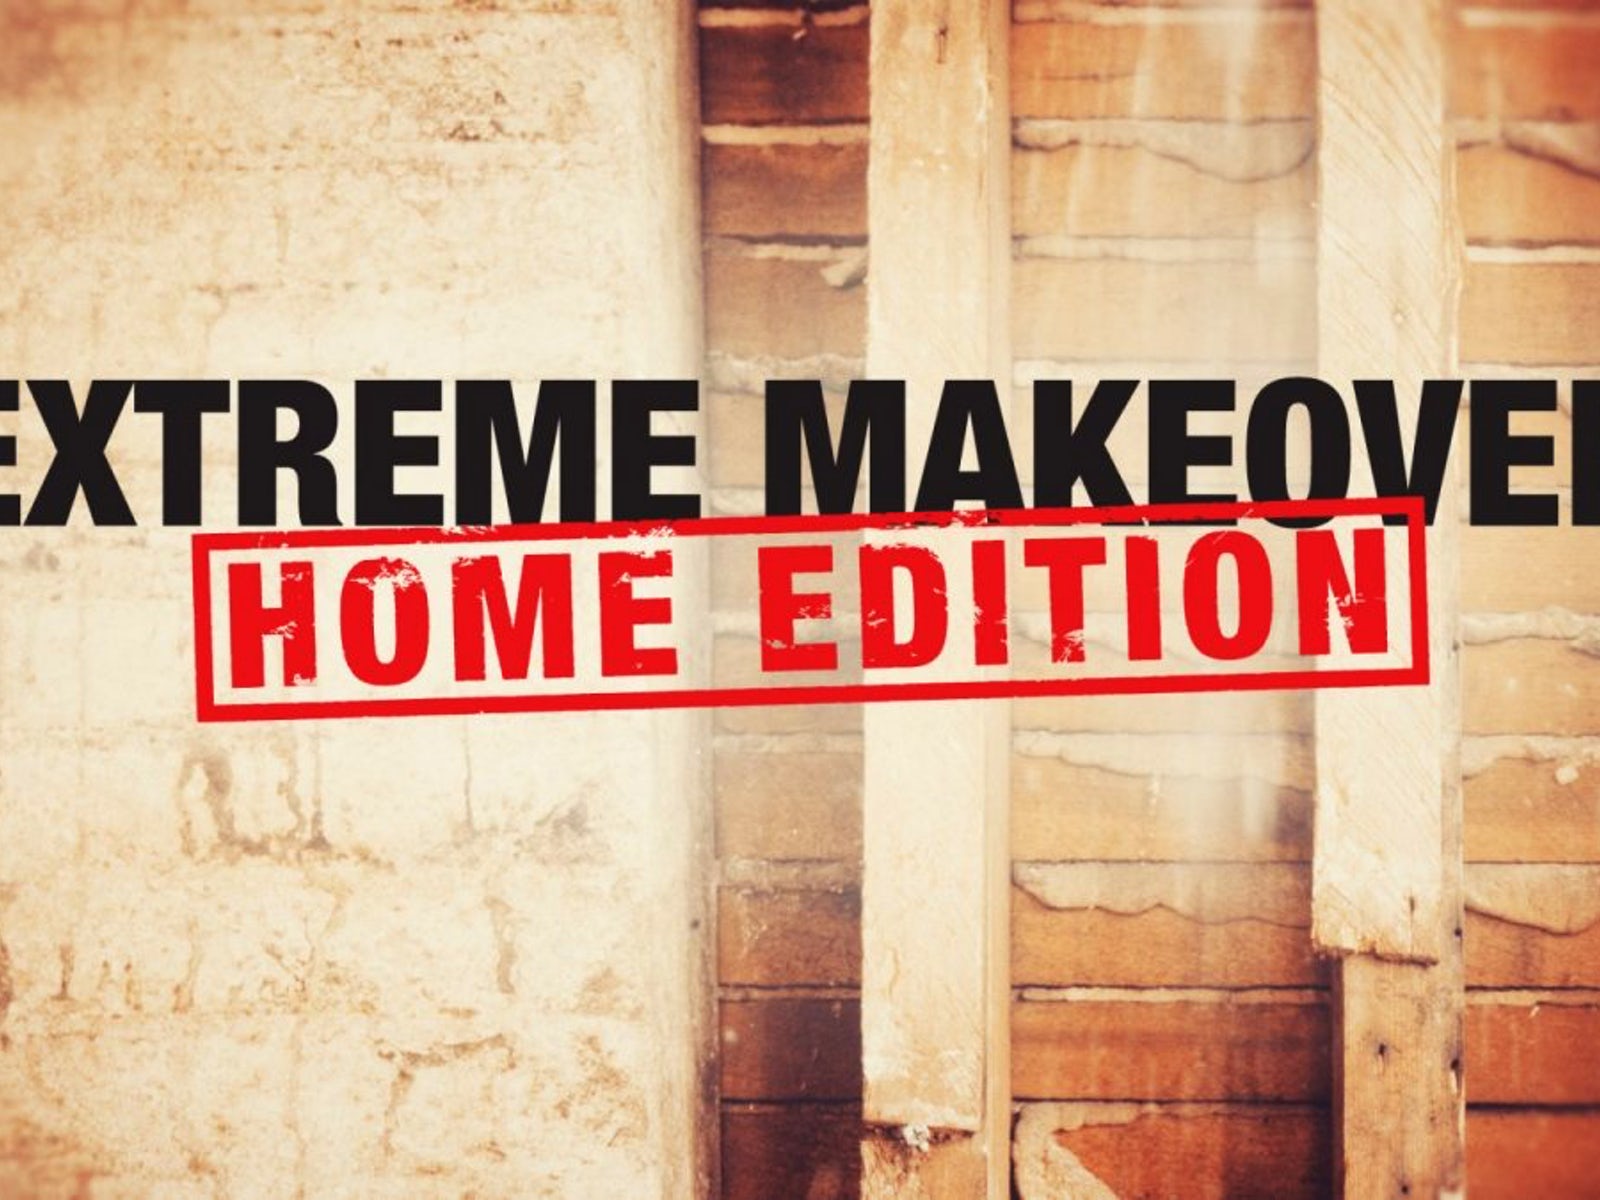 'Extreme Makeover: Home Edition' revival's premiere date announced by